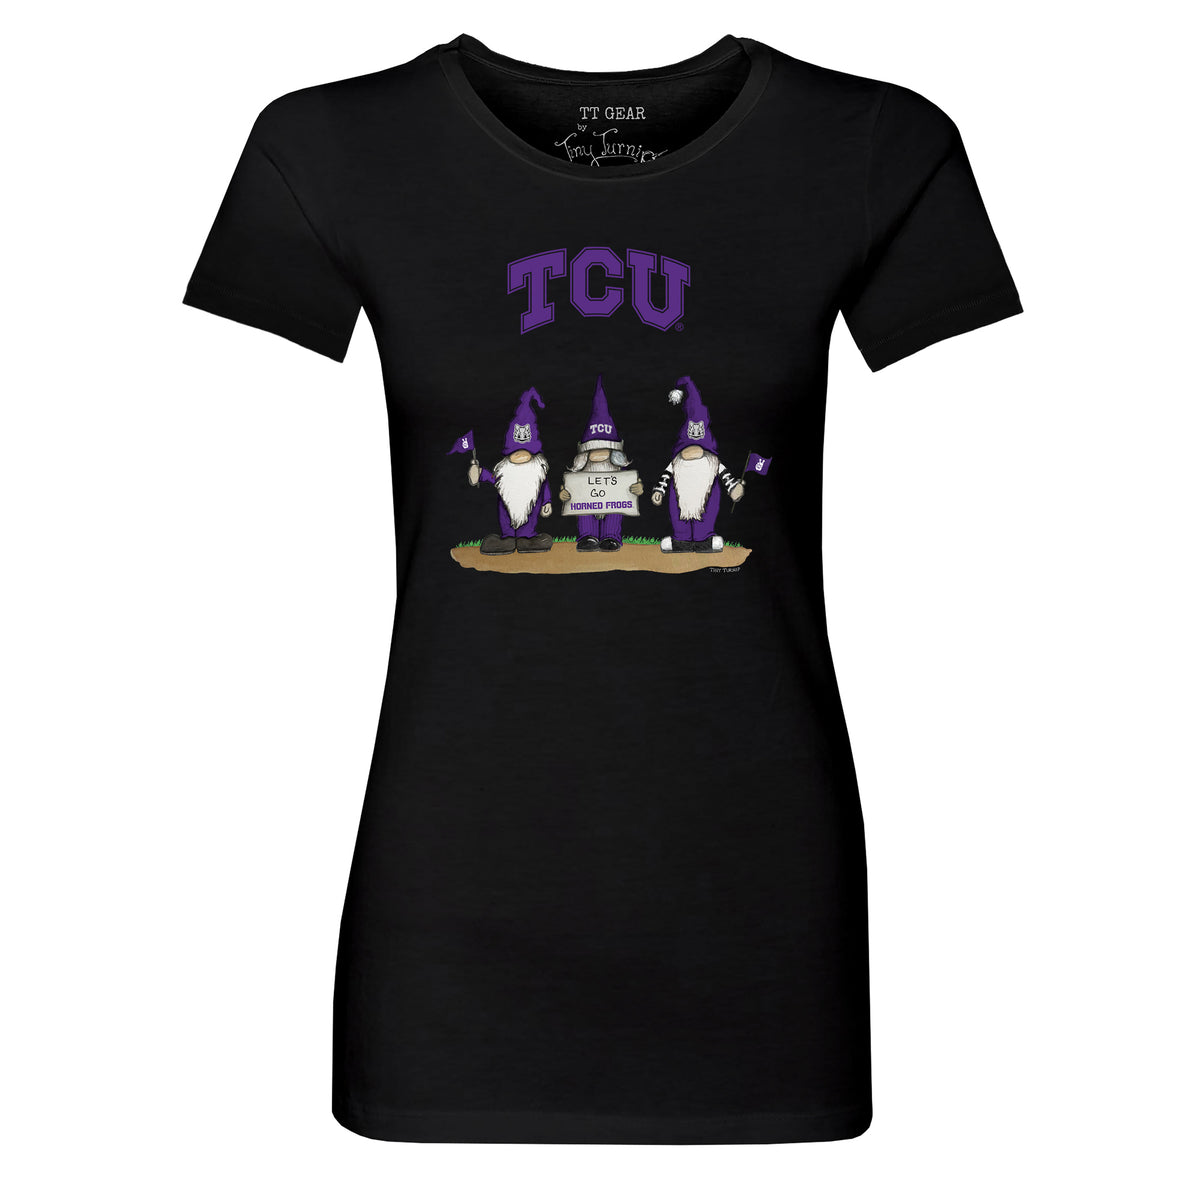 TCU Horned Frogs Gnomes Tee Shirt